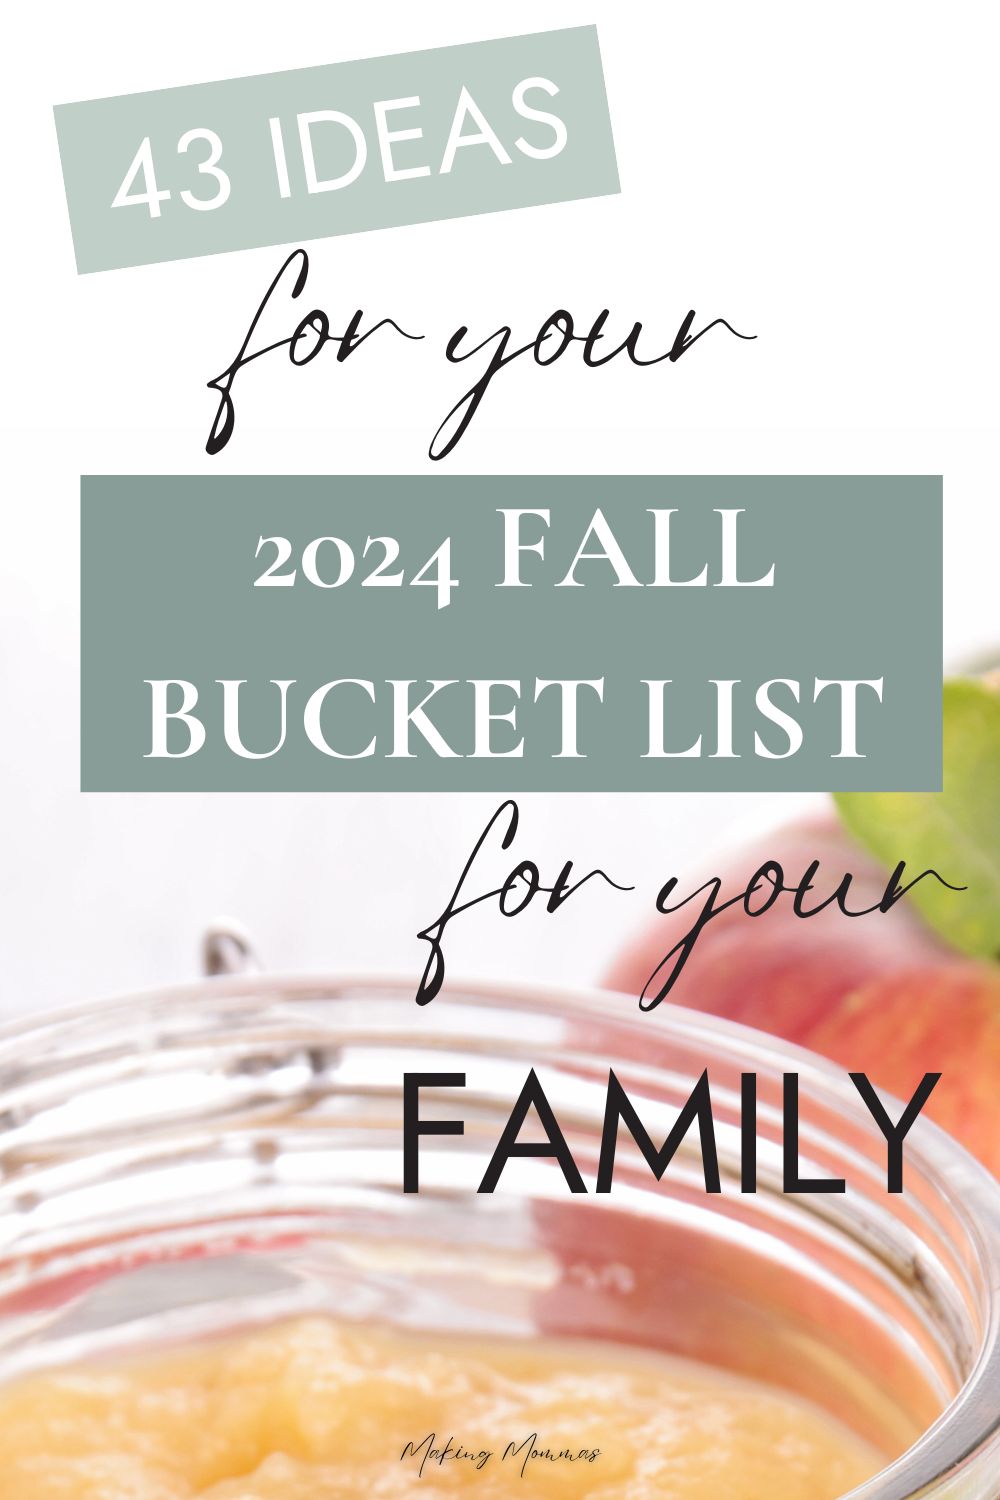 Pin image that reads, "43 ideas for your 2024 fall bucket list for your family."